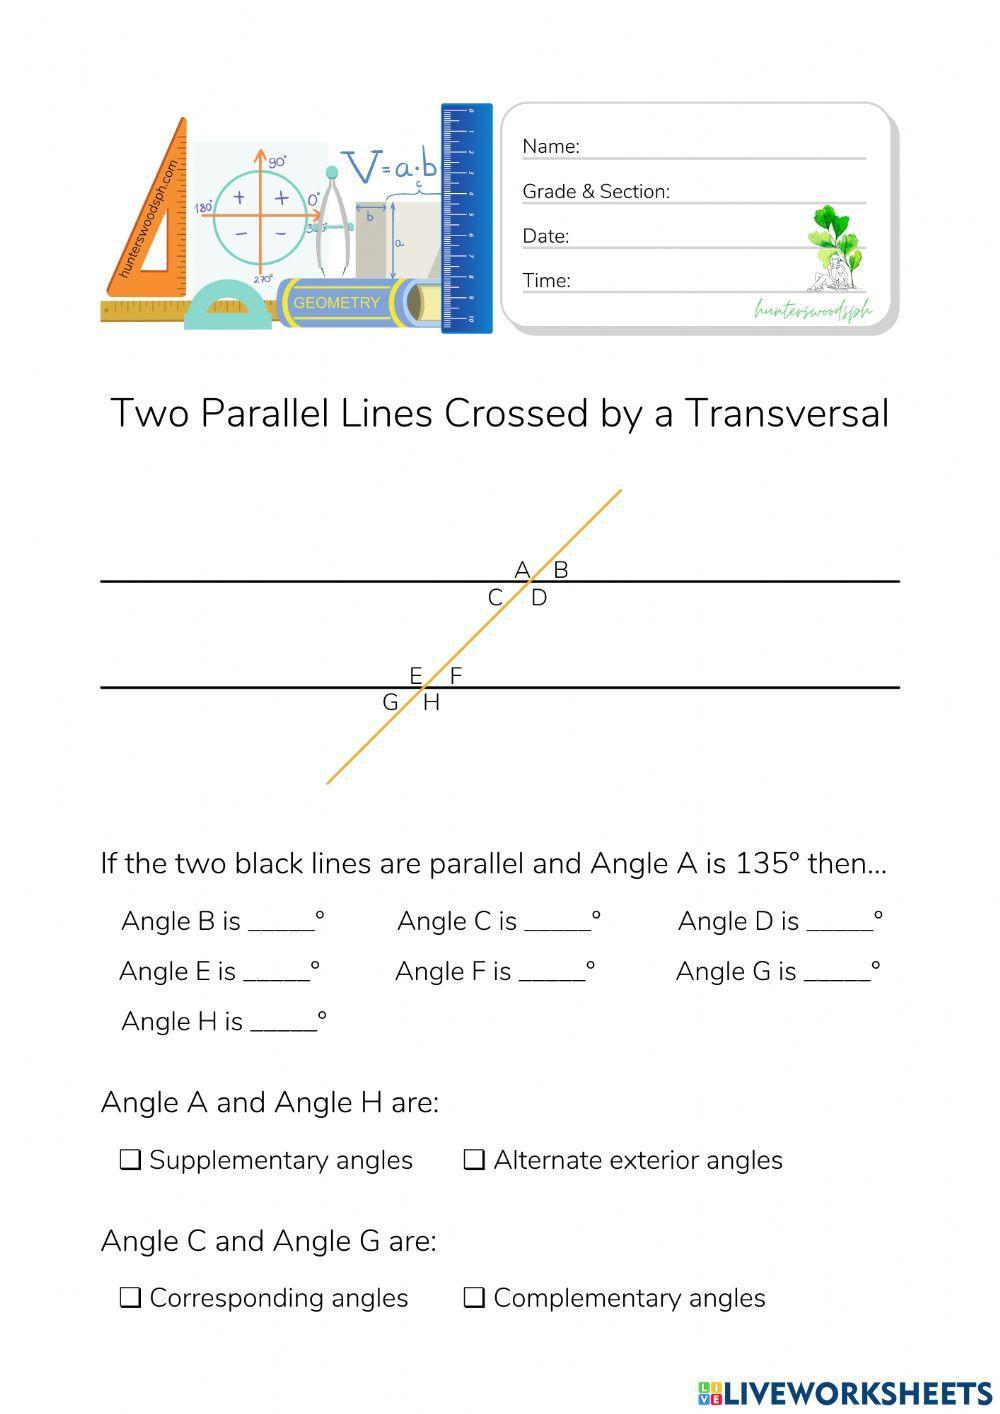 Two Parallel Lines Crossed By A Transversal (HuntersWoodsPH Montessori Geometry)